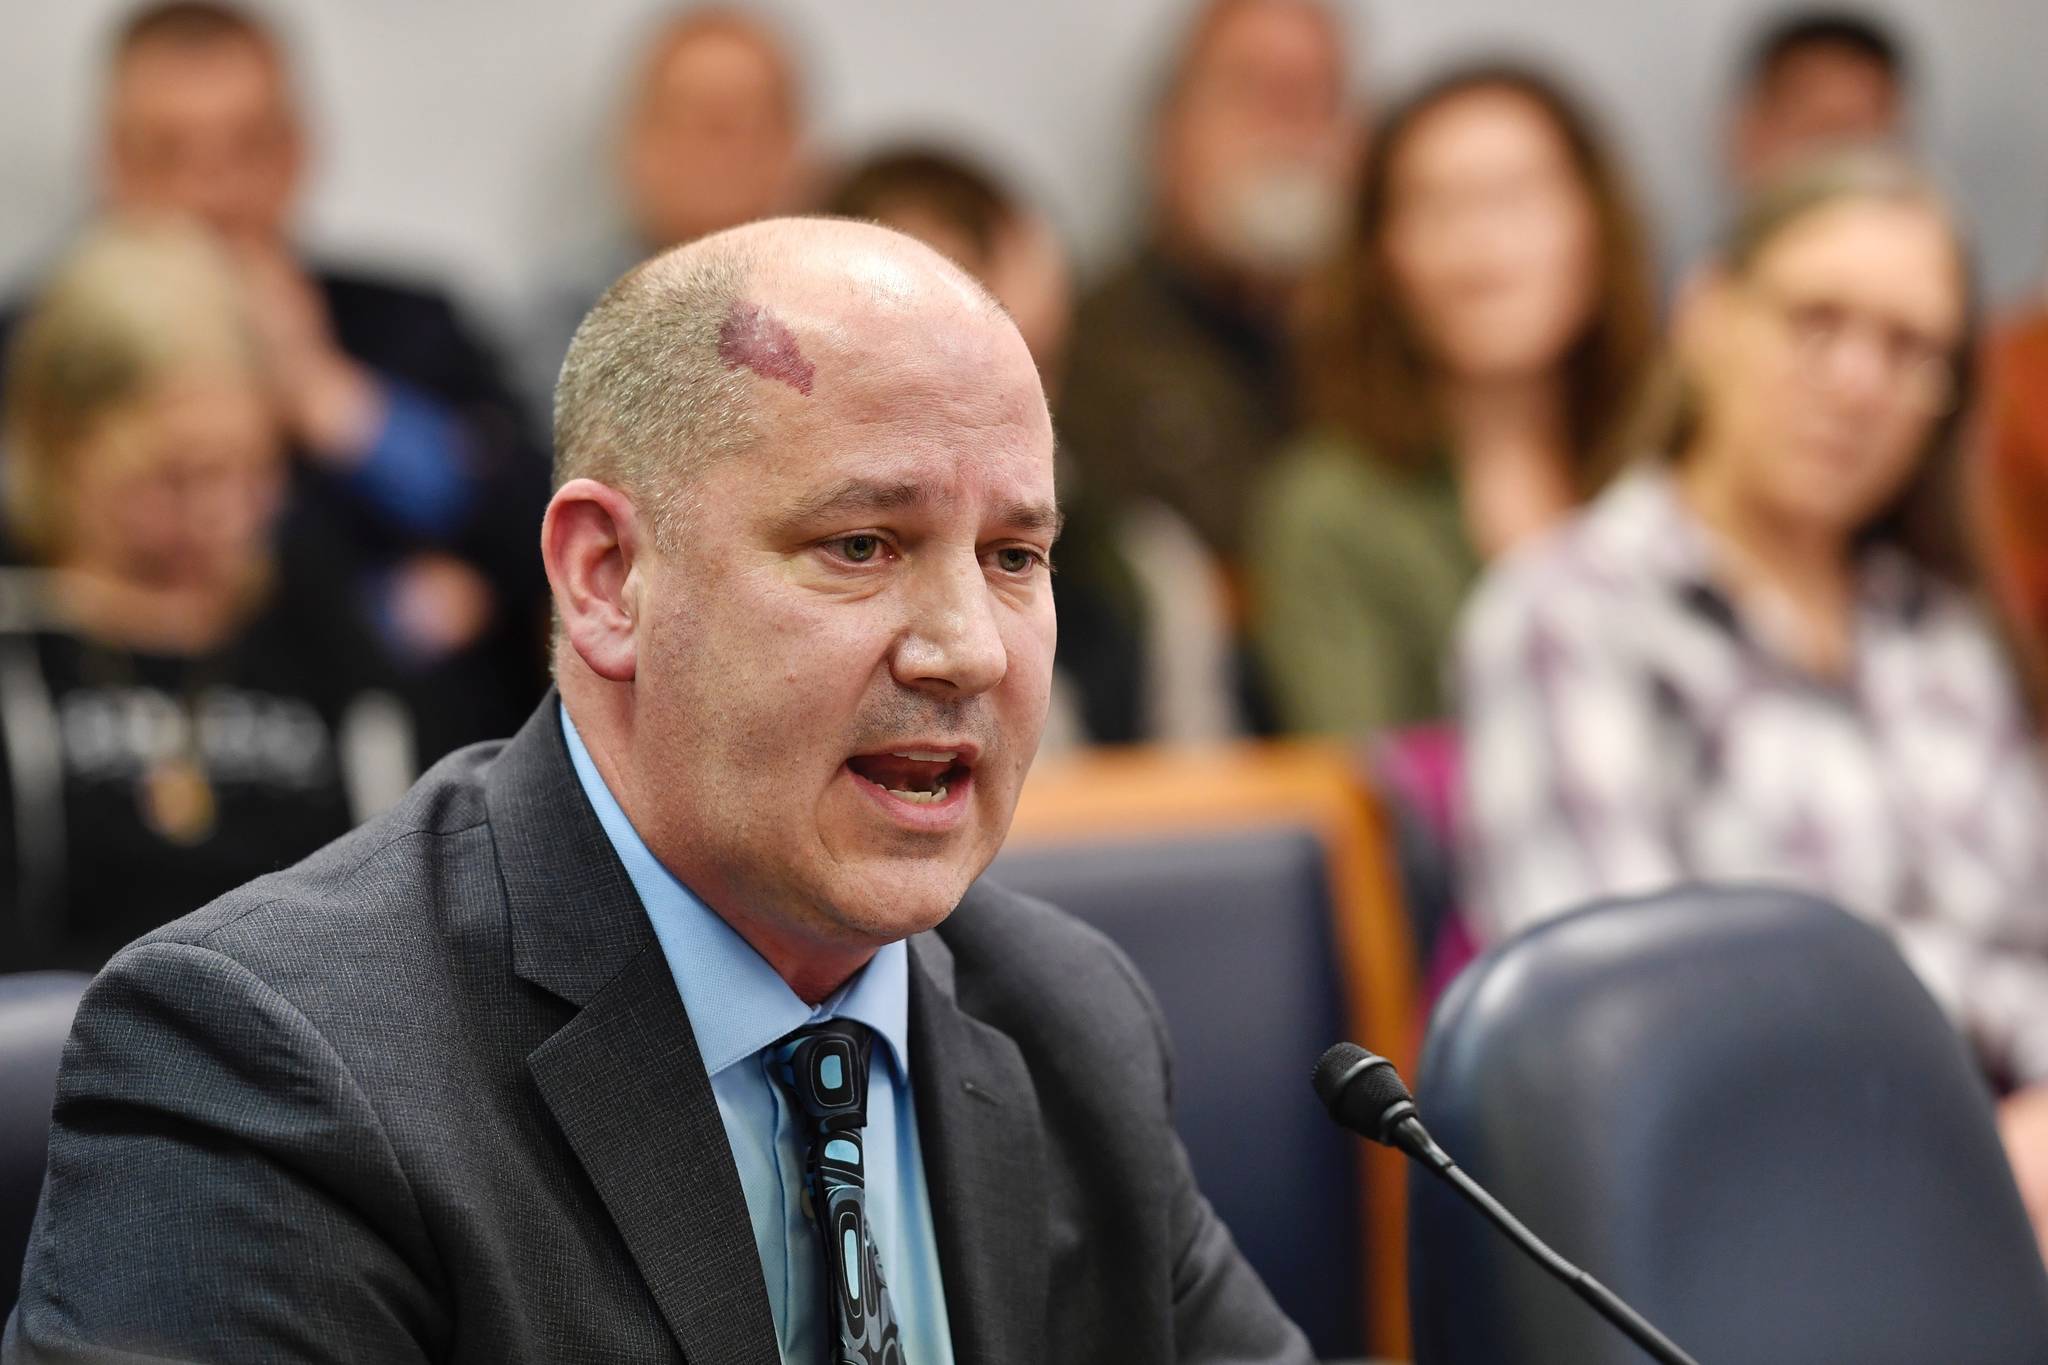 Jason Brune, Commissioner designee for the Department of Environmental Conservation, speaks to the House Resources Committee at the Capitol on Friday, March 14, 2019. (Michael Penn | Juneau Empire)